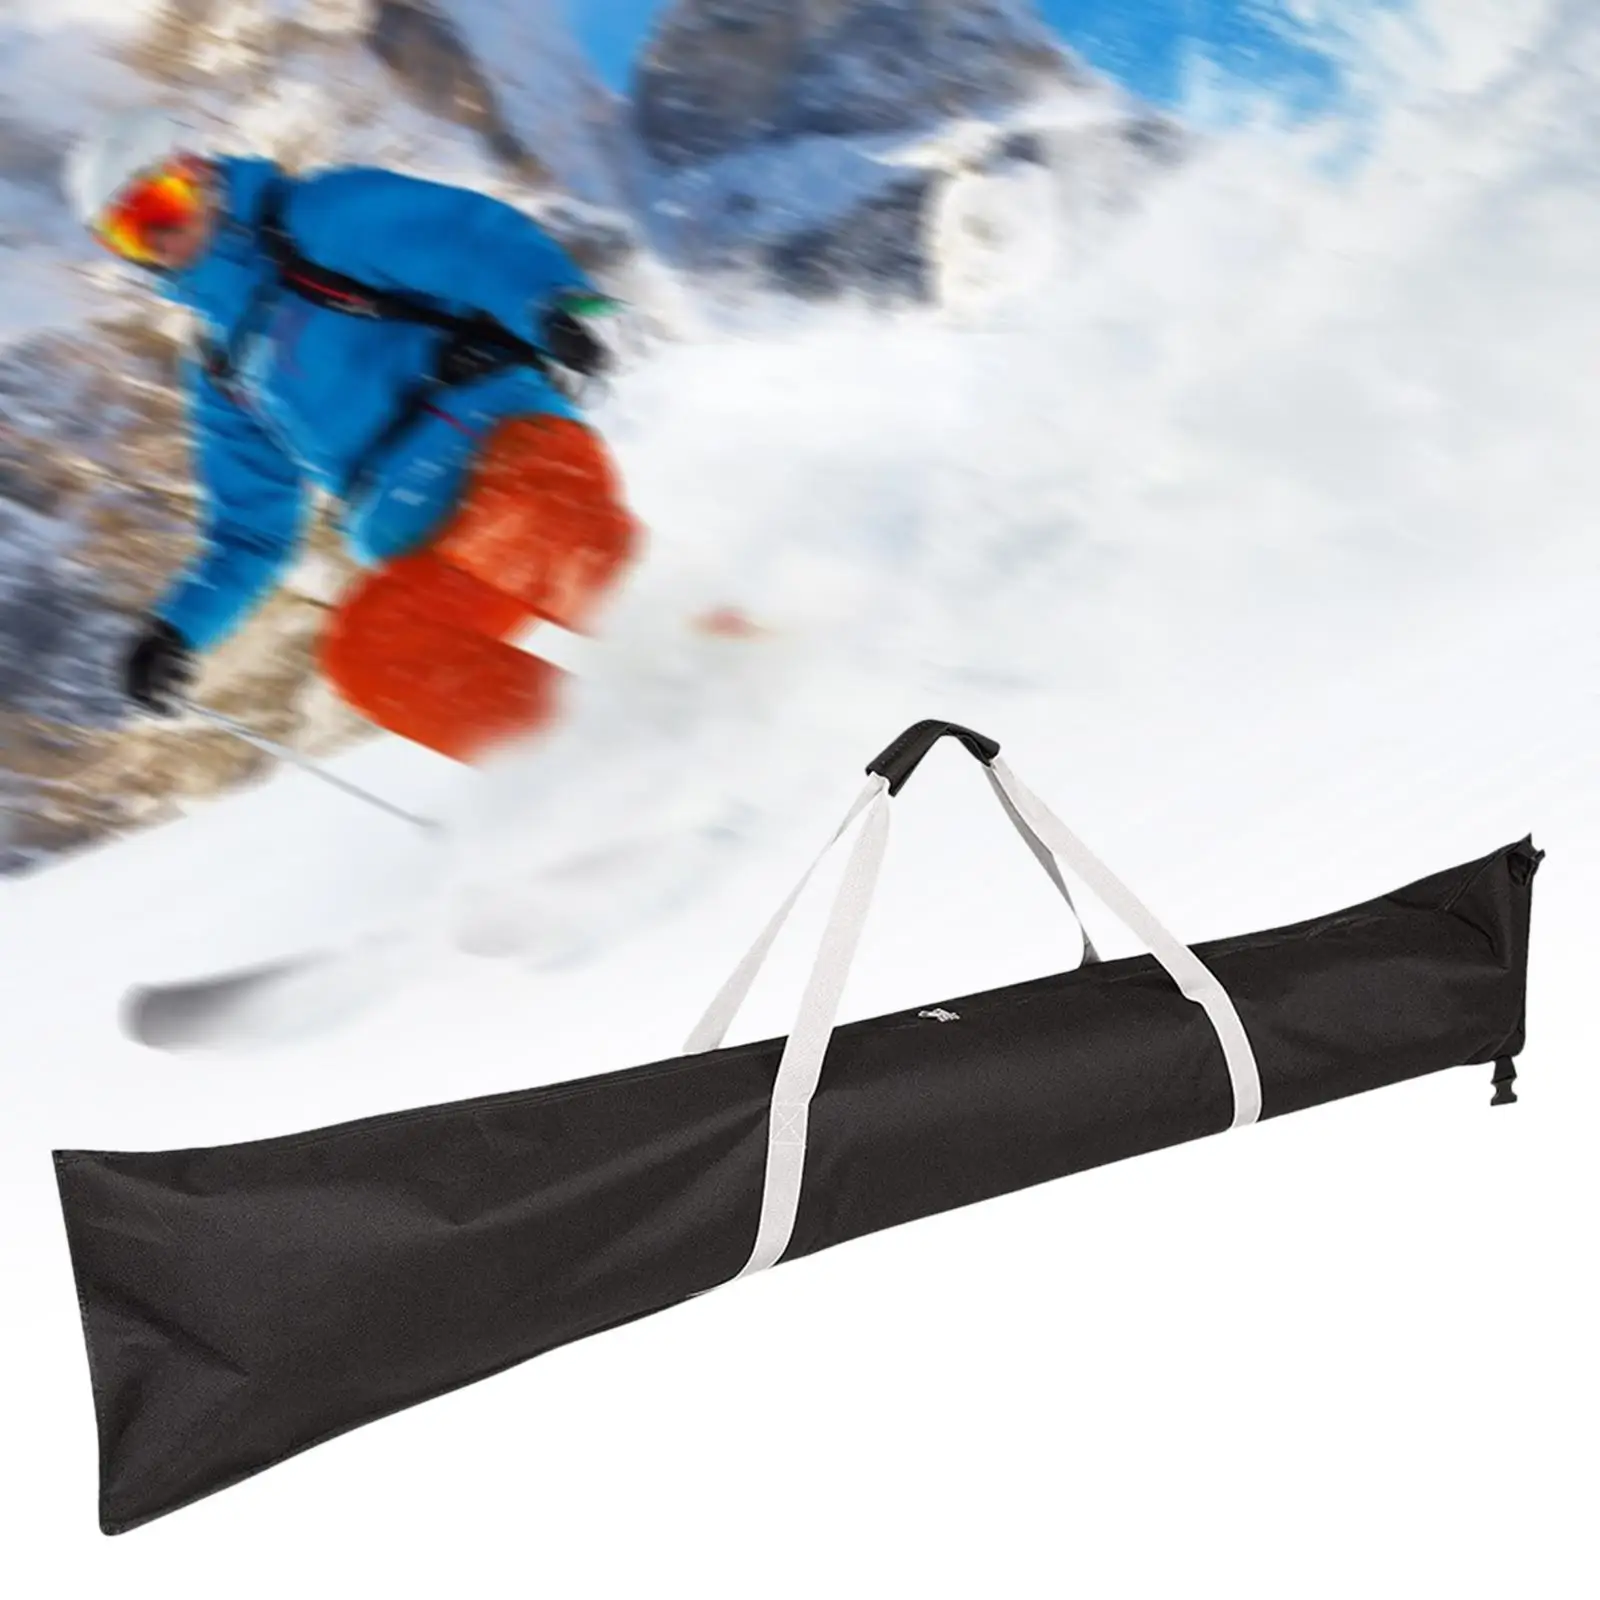 Ski Bag with Handle Protective Men Women Durable Snow Travel Transport Ski Travel Bag for Skiing Winter Sports Outdoor Gloves